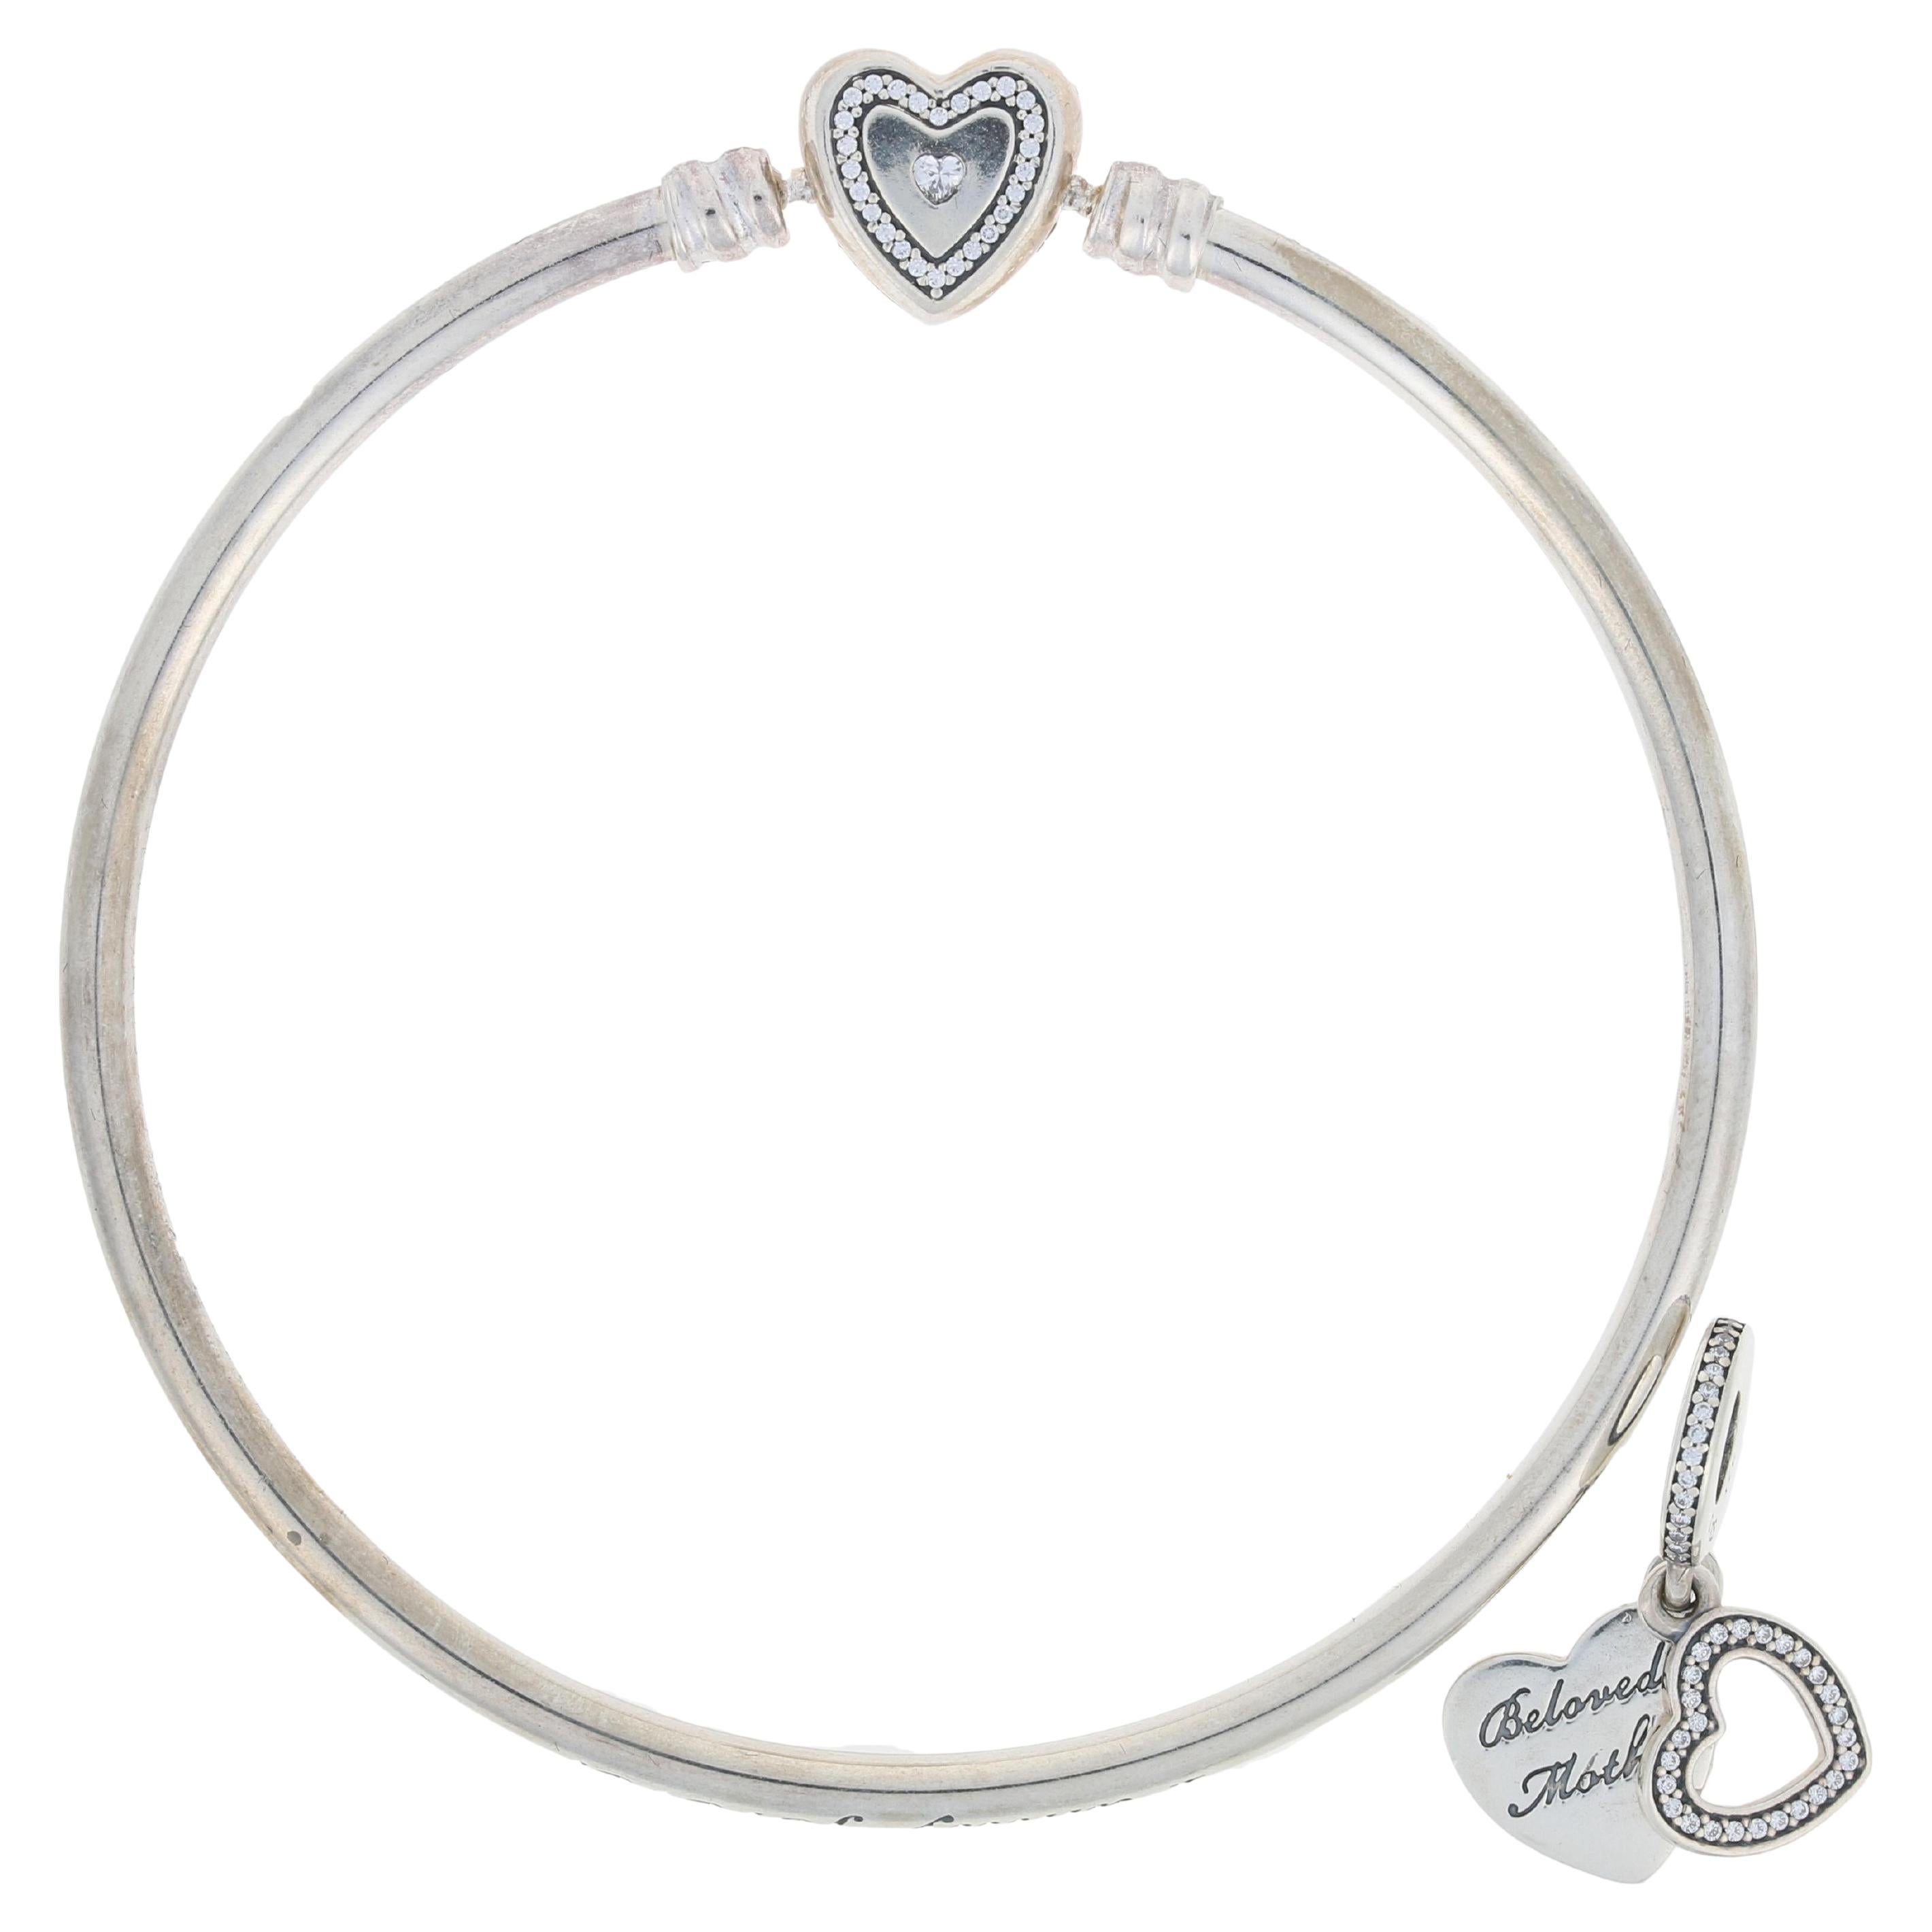 NEW Authentic Pandora A Mother's Love Bracelet Silver Hearts 6.7" USB7961-17 For Sale